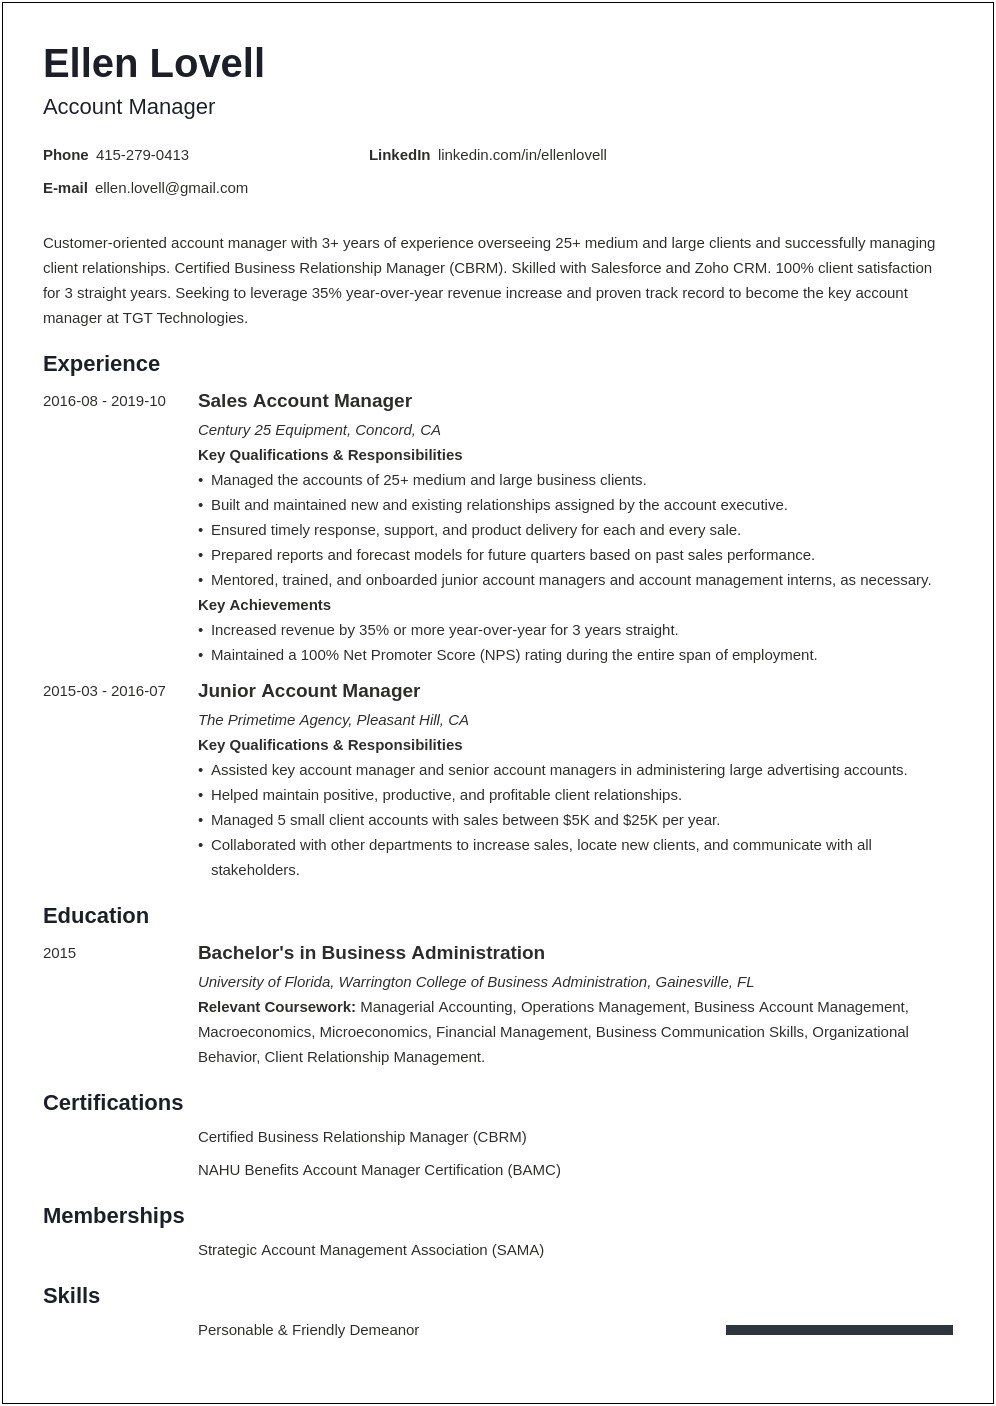 Resume For Account Manager Position